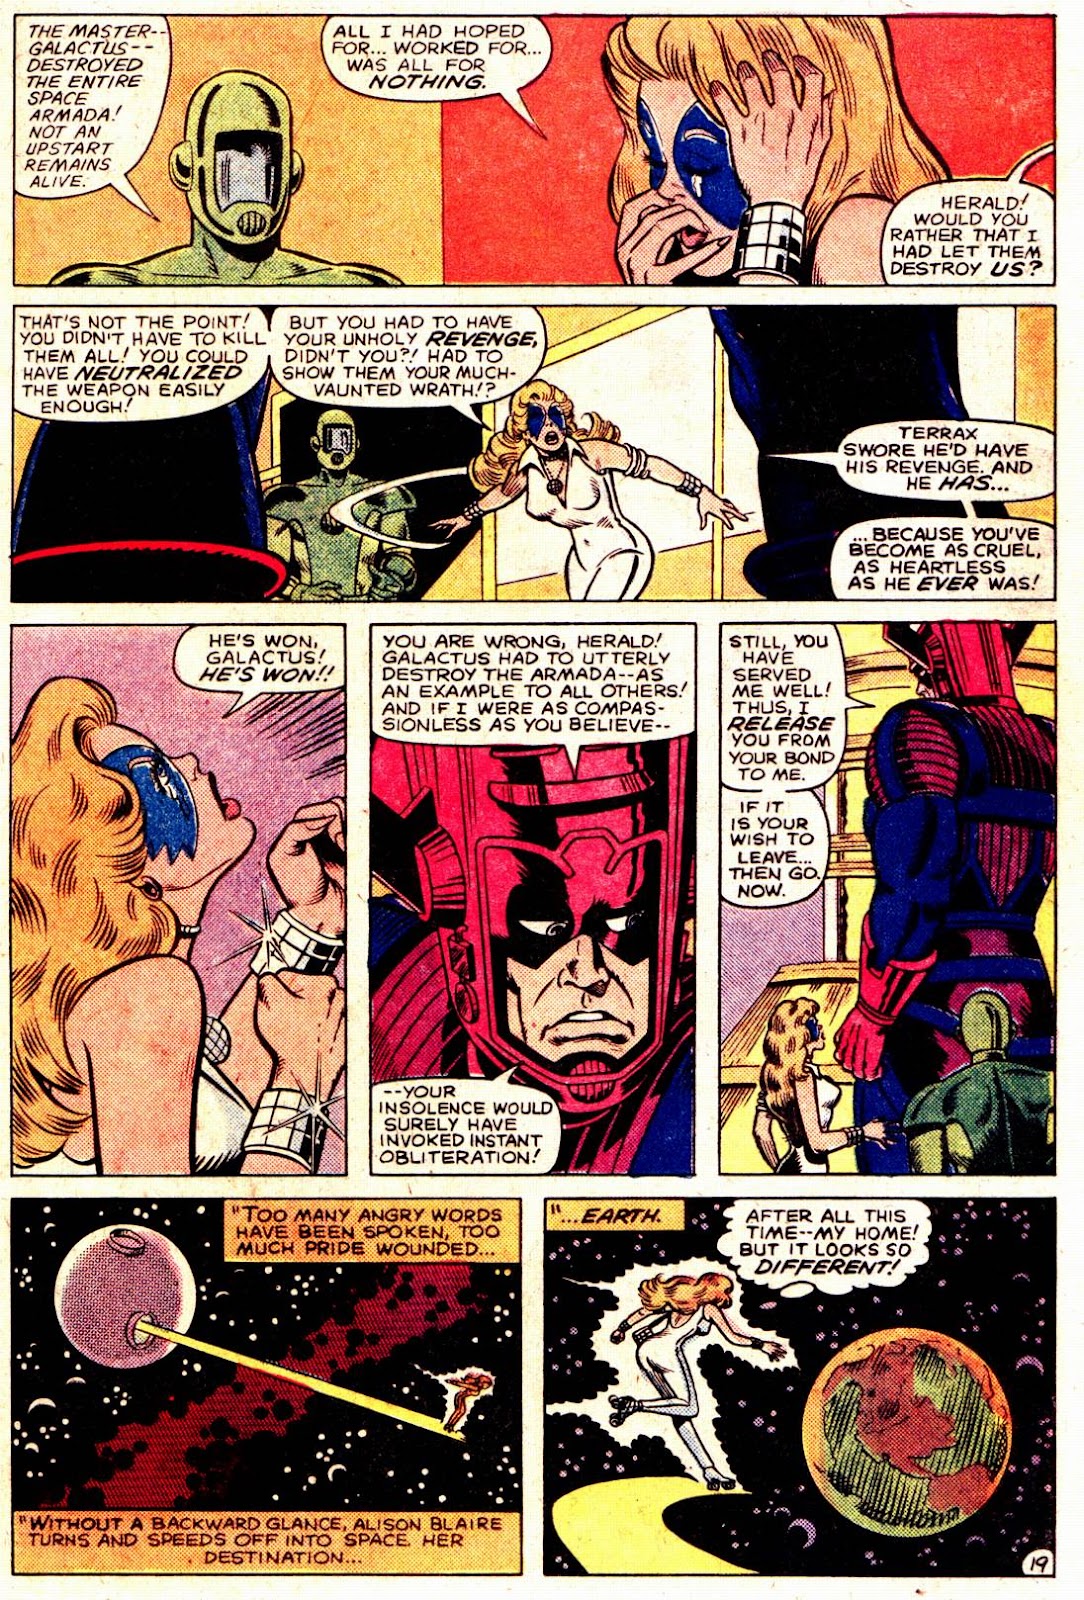 What If? (1977) issue 33 - Dazzler and Iron Man - Page 20